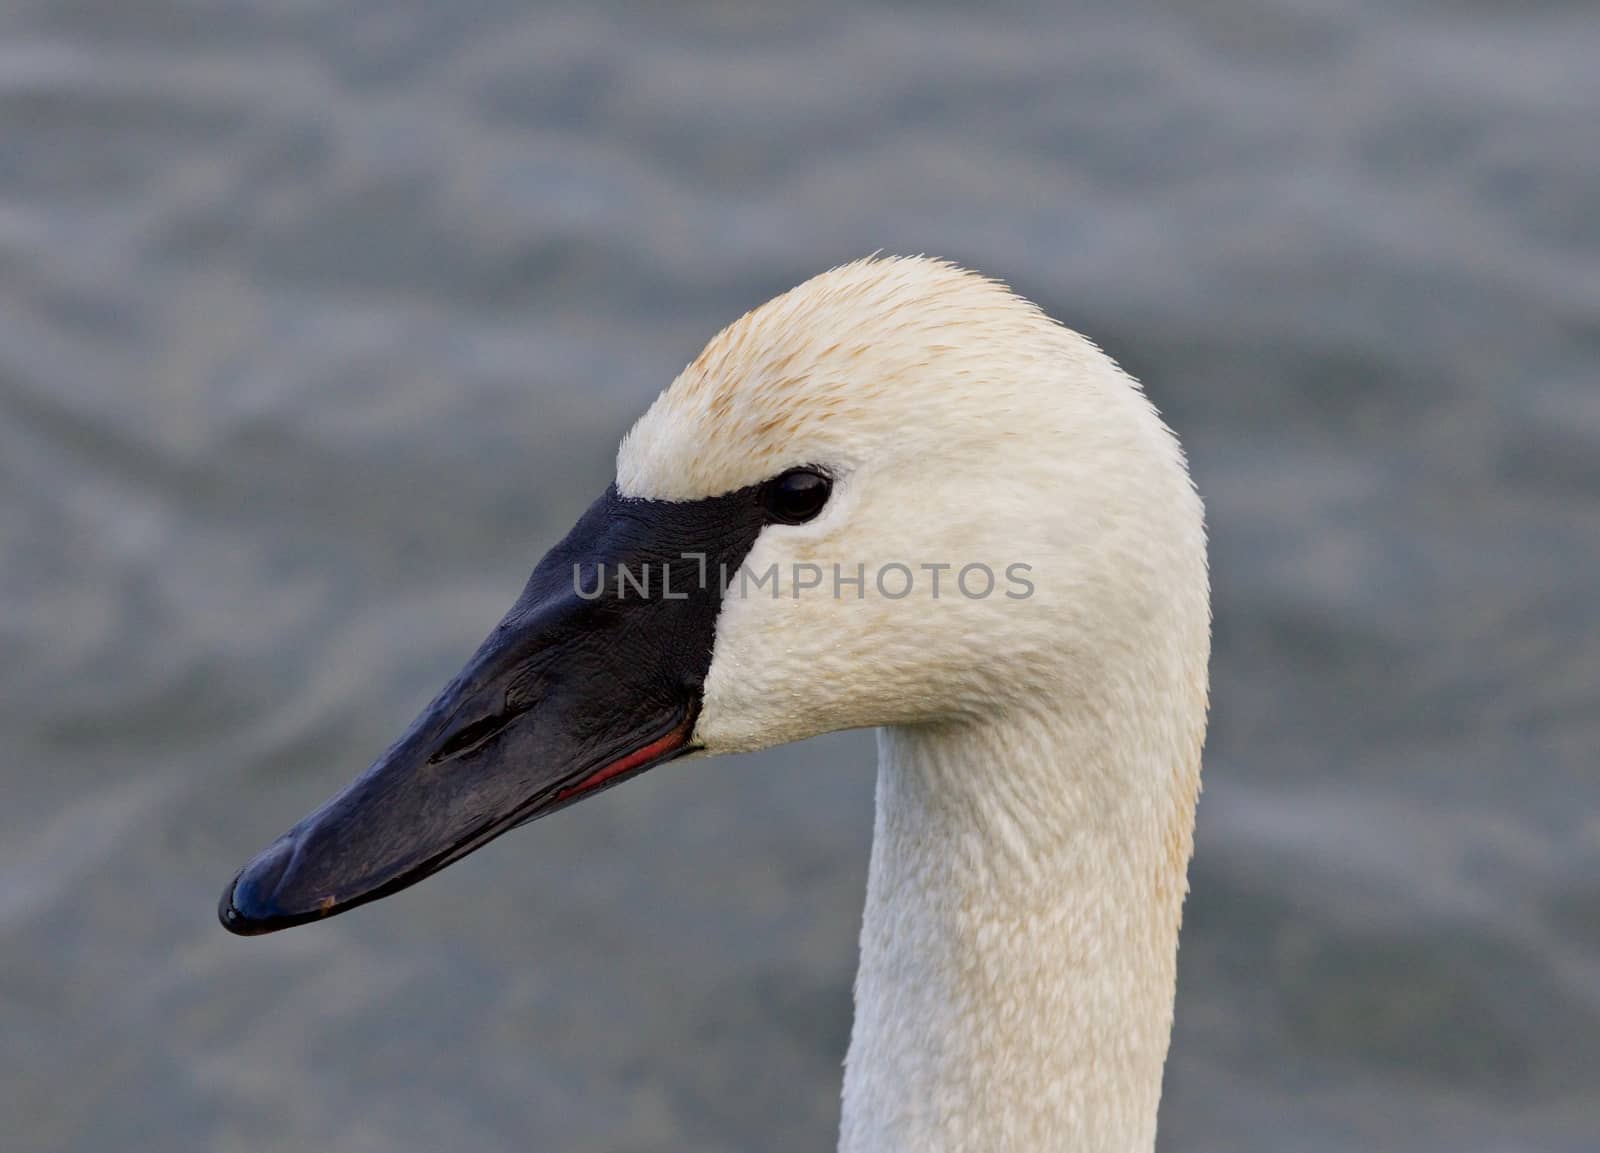 Beautiful image with a wild serious trumpeter swan by teo